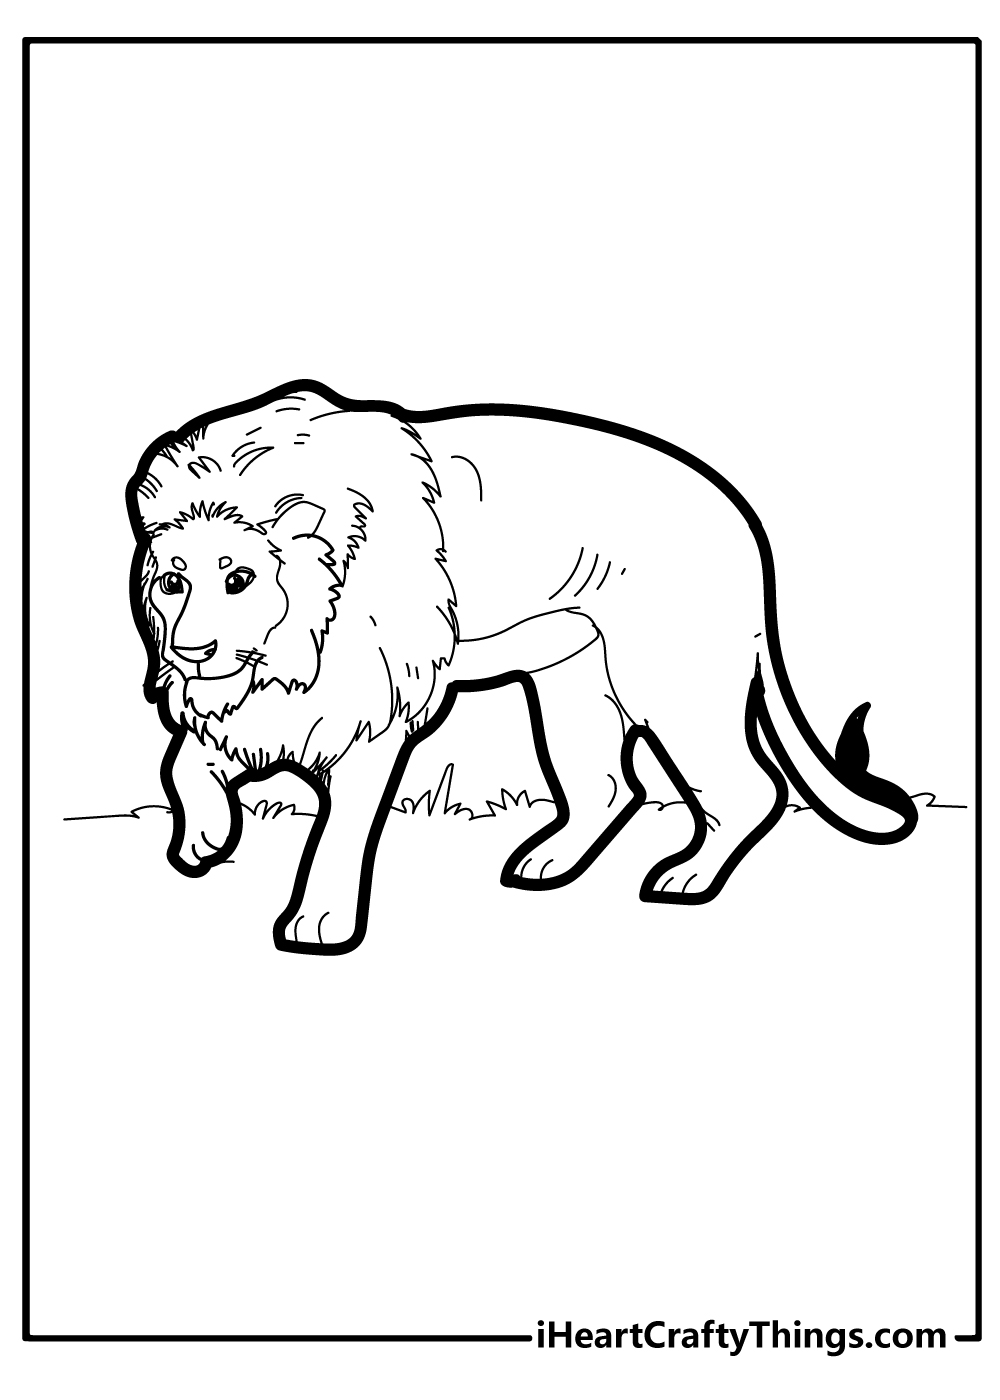 Lion Coloring Pages for adults free printable